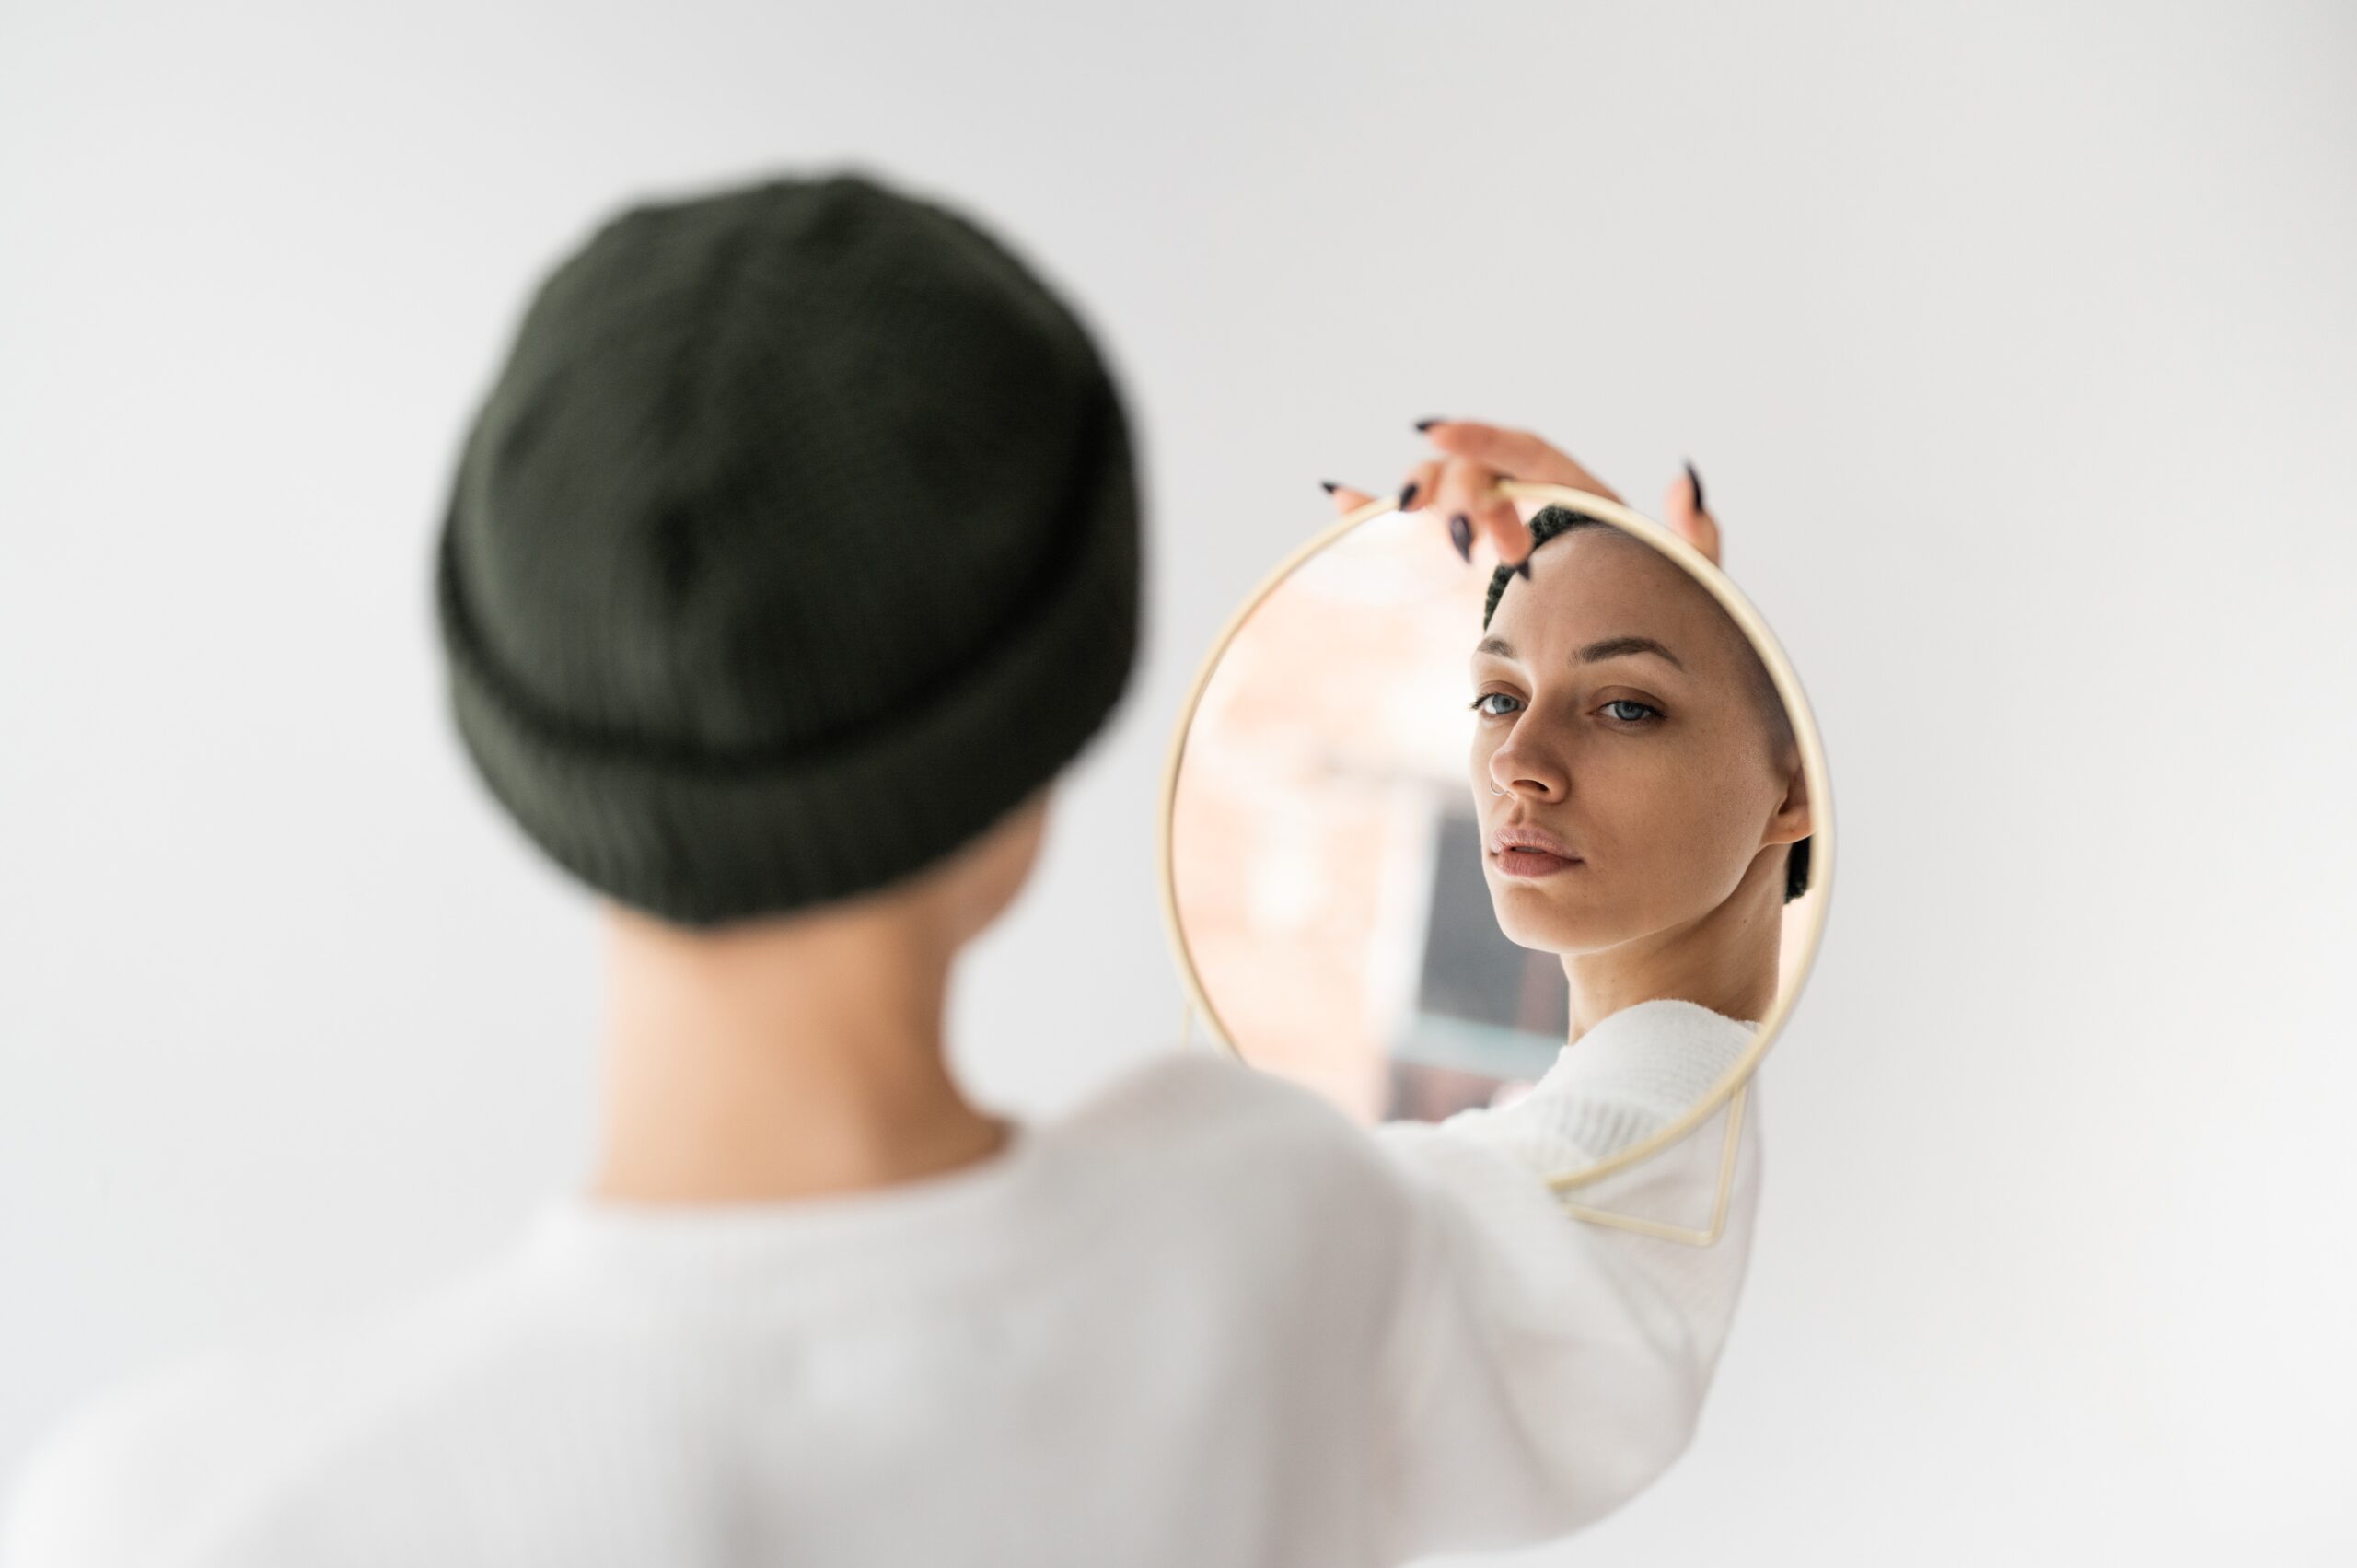 The Art Of Self-Reflection: Gaining Clarity And Finding Purpose